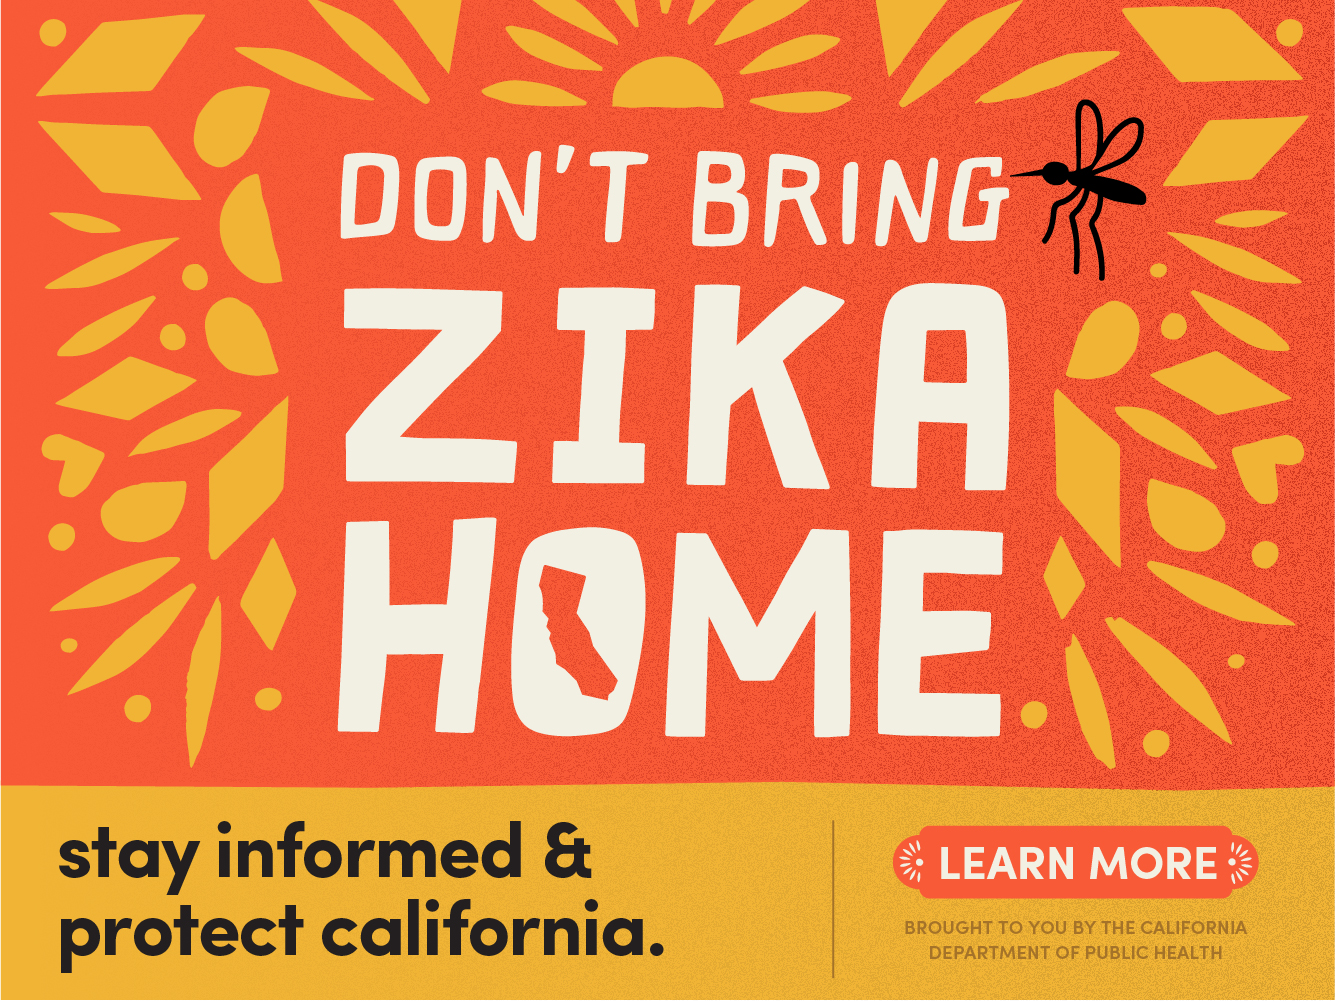 Stay informed & protect California